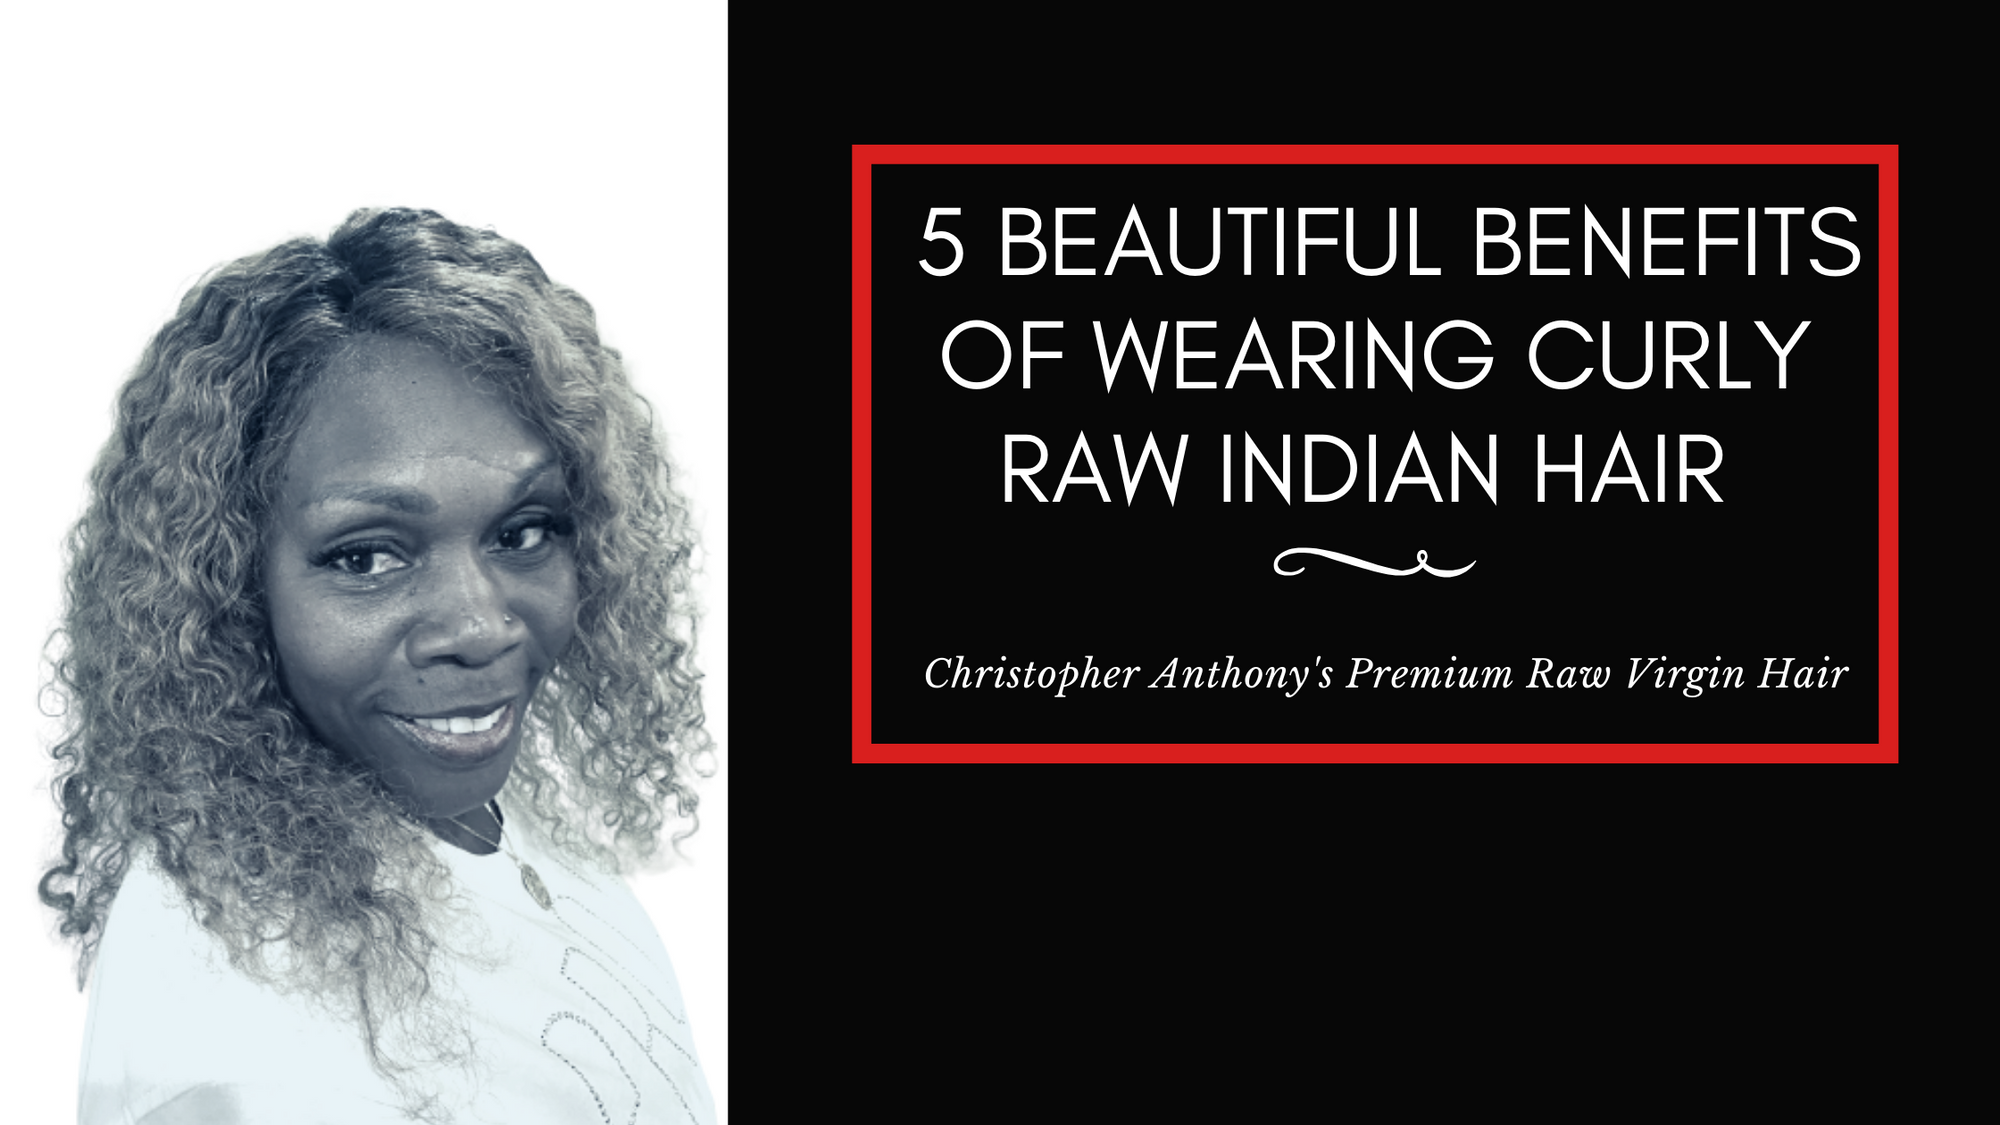 5 Beautiful Benefits of Wearing Curly Raw Indian Hair